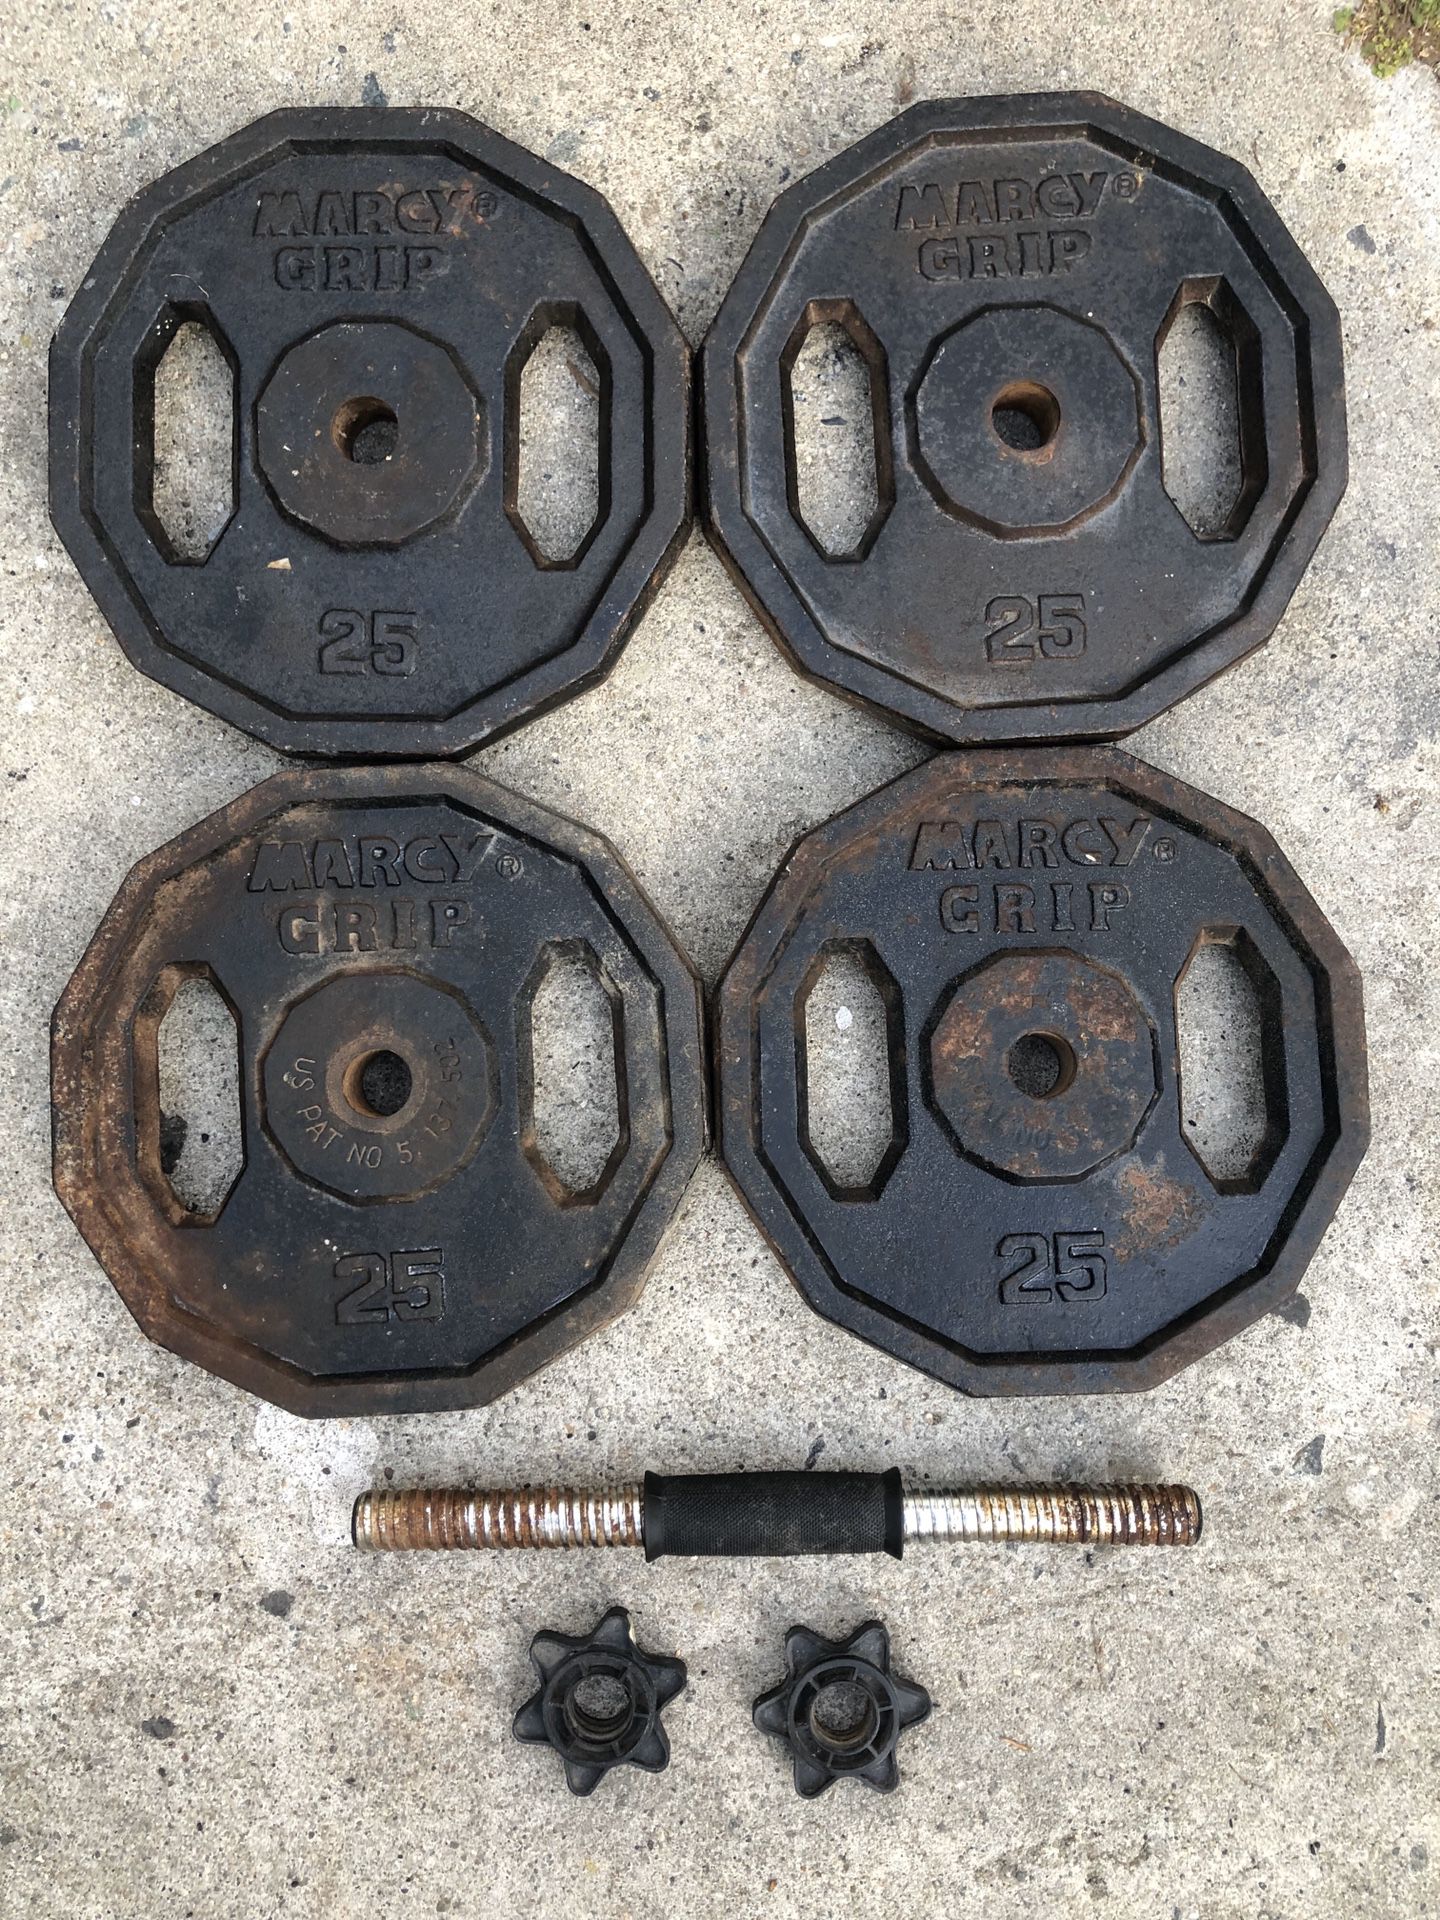 Standard Olympic 25lbs pairs comes with single dumbbells bar